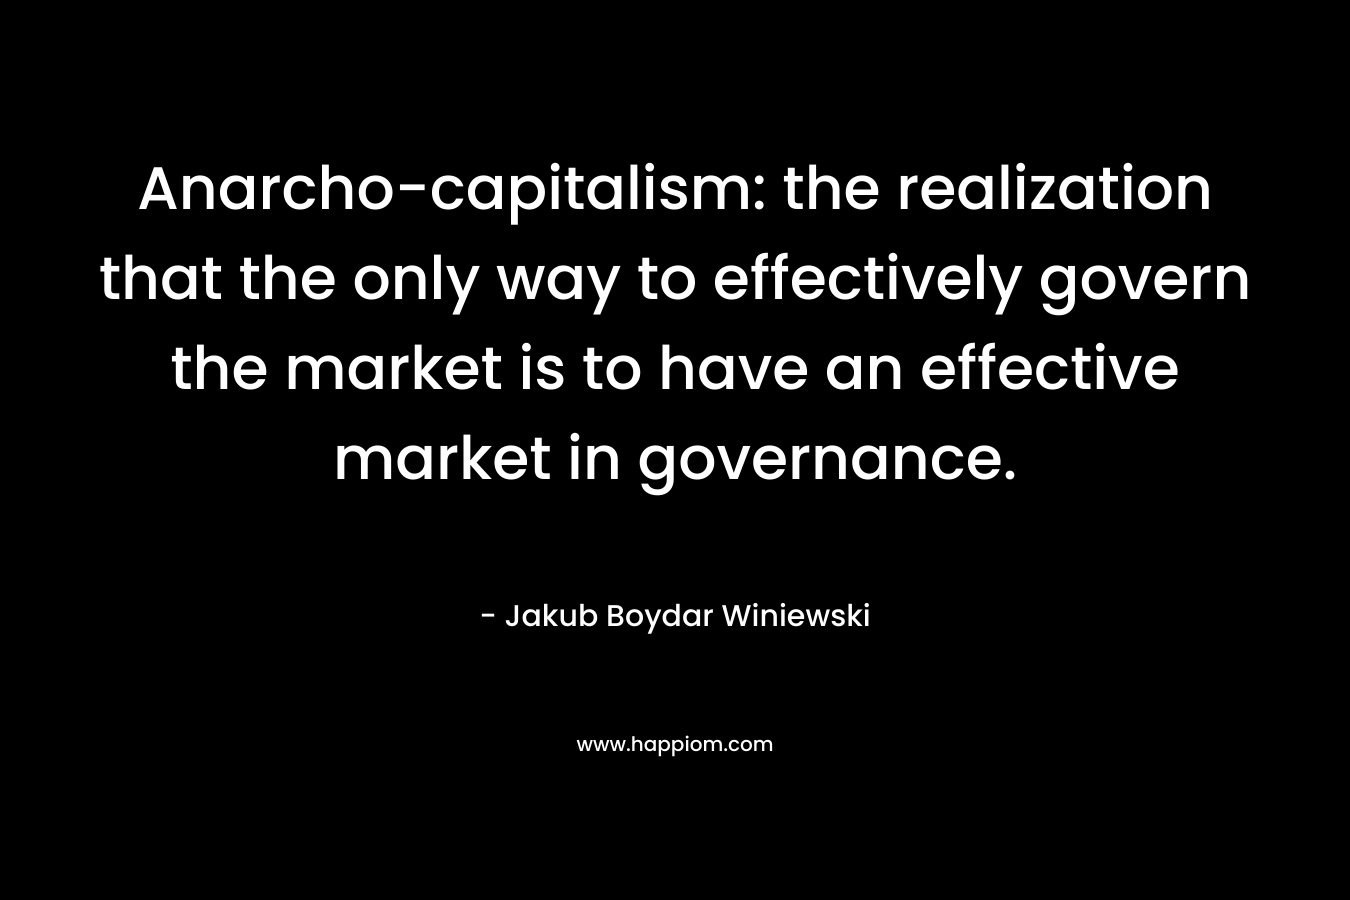 Anarcho-capitalism: the realization that the only way to effectively govern the market is to have an effective market in governance. – Jakub Boydar Winiewski